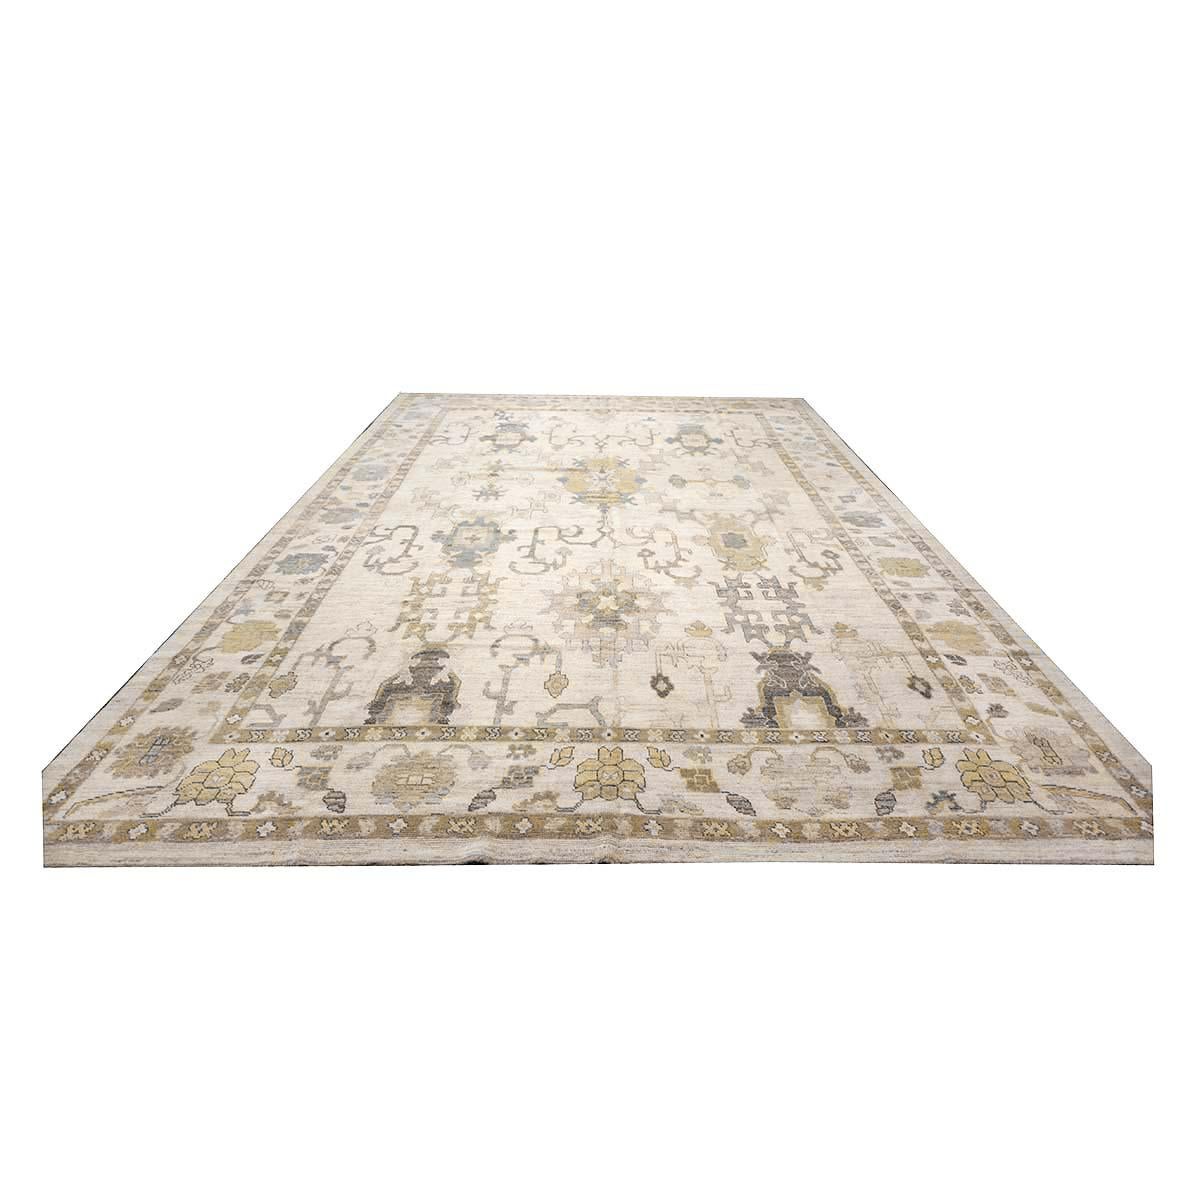   Ashly Fine Rugs presents a 21st-century Oversized Turkish Oushak 12x19 Handmade Area Rug. Oushak weavings began in a location just south of Istanbul, in a region that was to become the rugs namesake, Oushak. Although nomads first produced the rugs